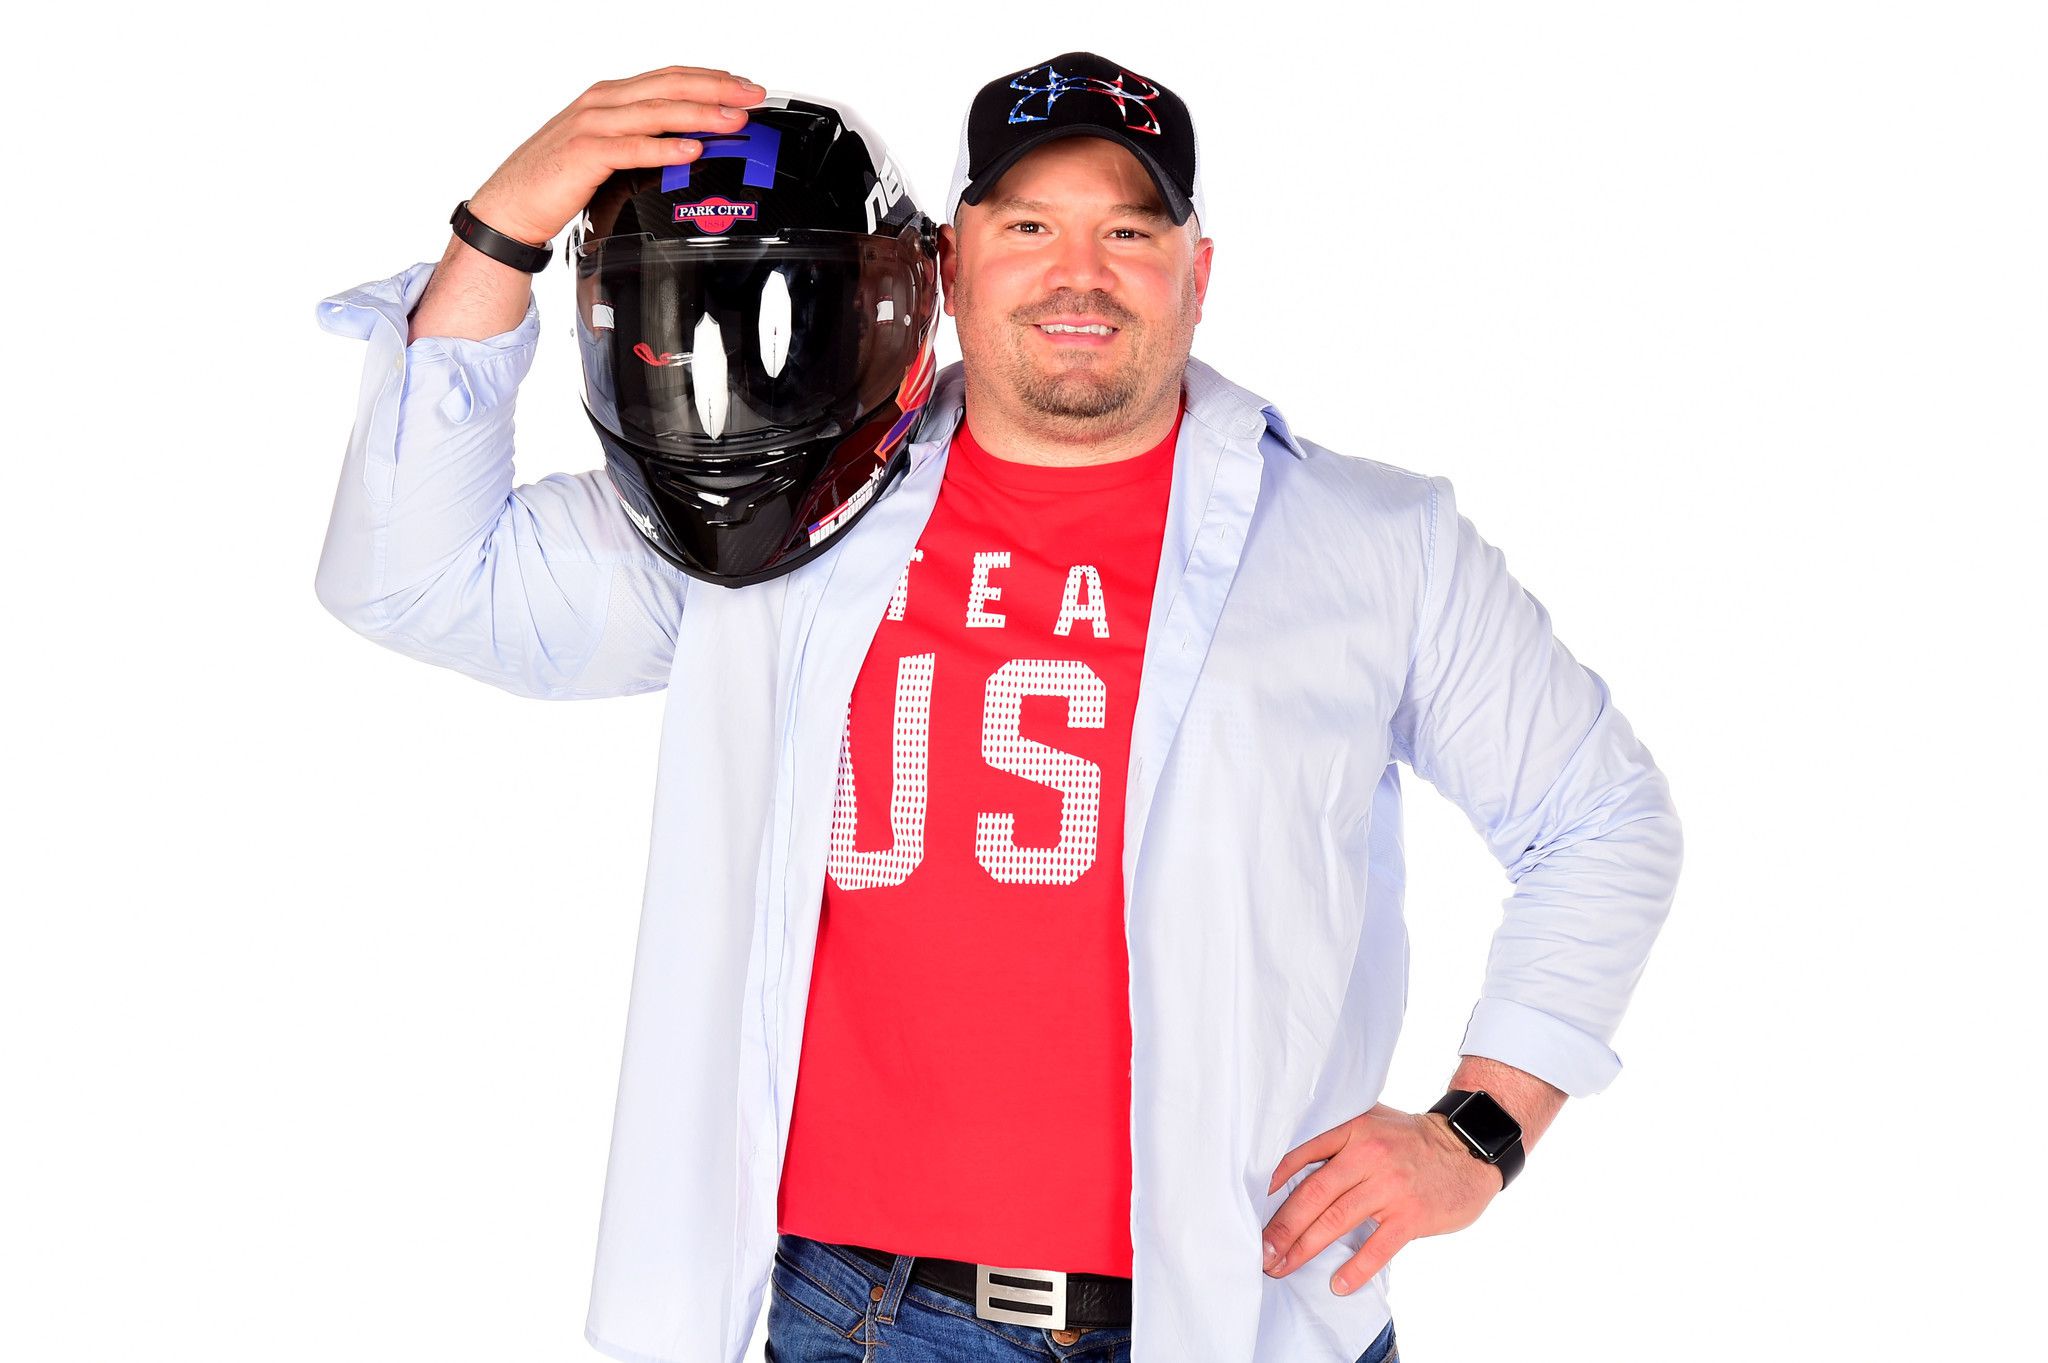 USA Bobsled, the late Steve Holcomb awarded Olympic silver medal